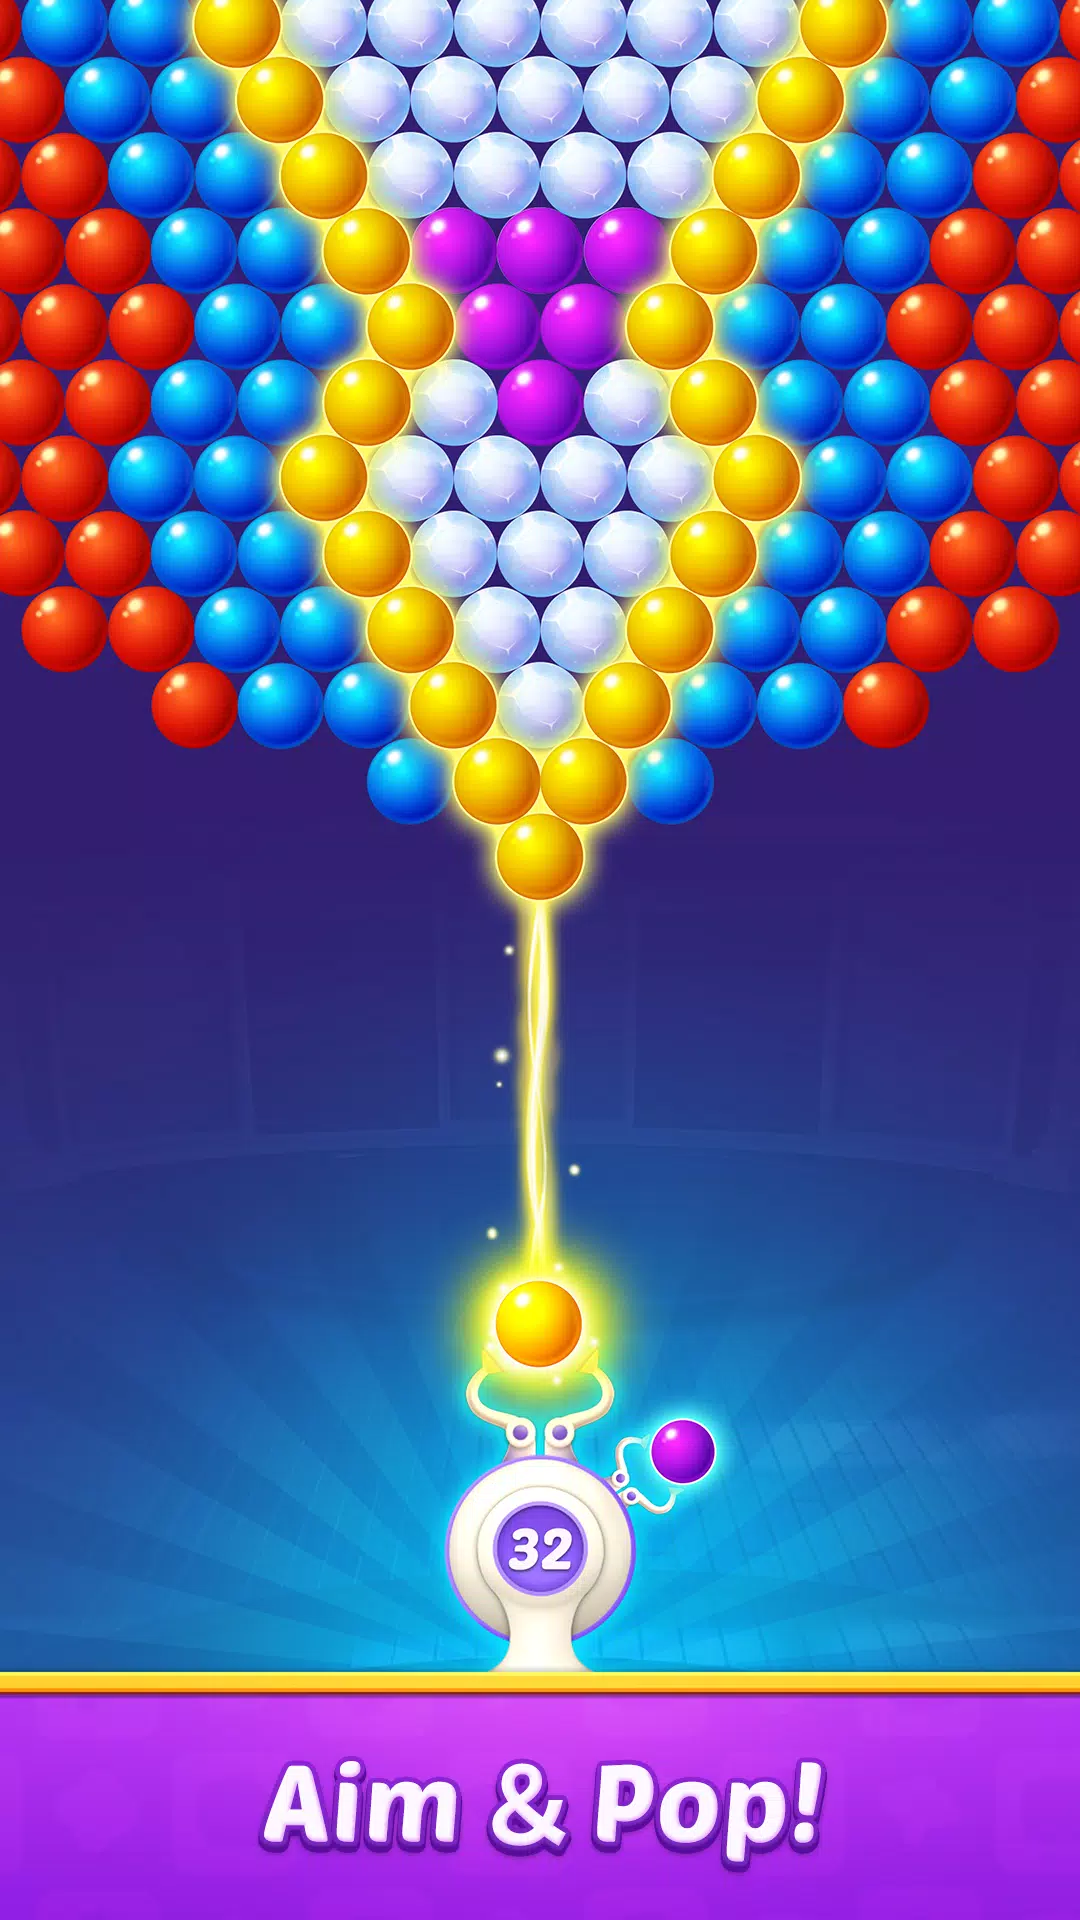 Download Bubble Shooter - Home Design MOD APK v129 for Android